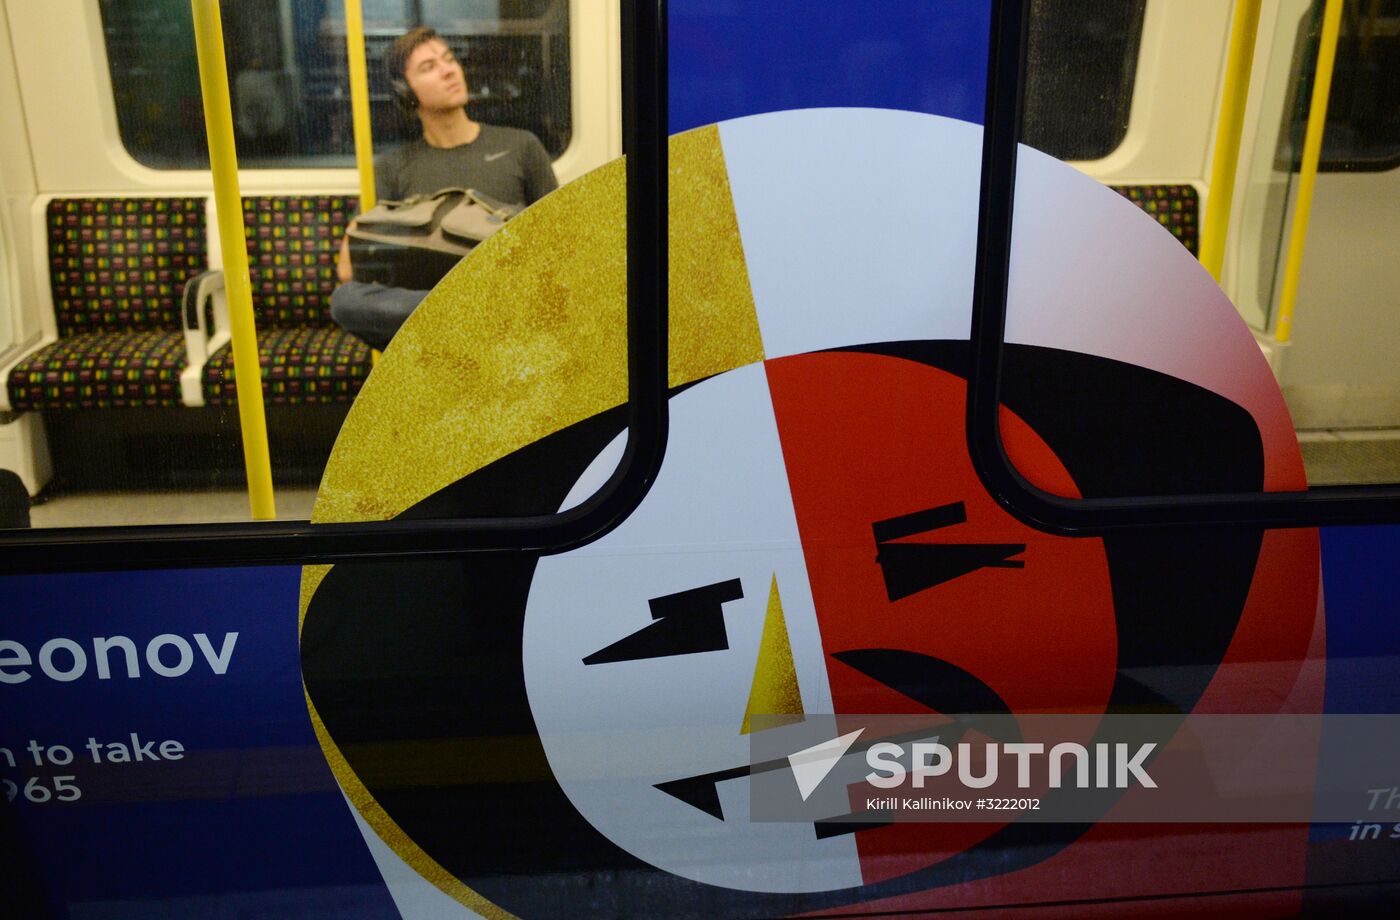 Themed train The Heart of Russia is launched in London tube